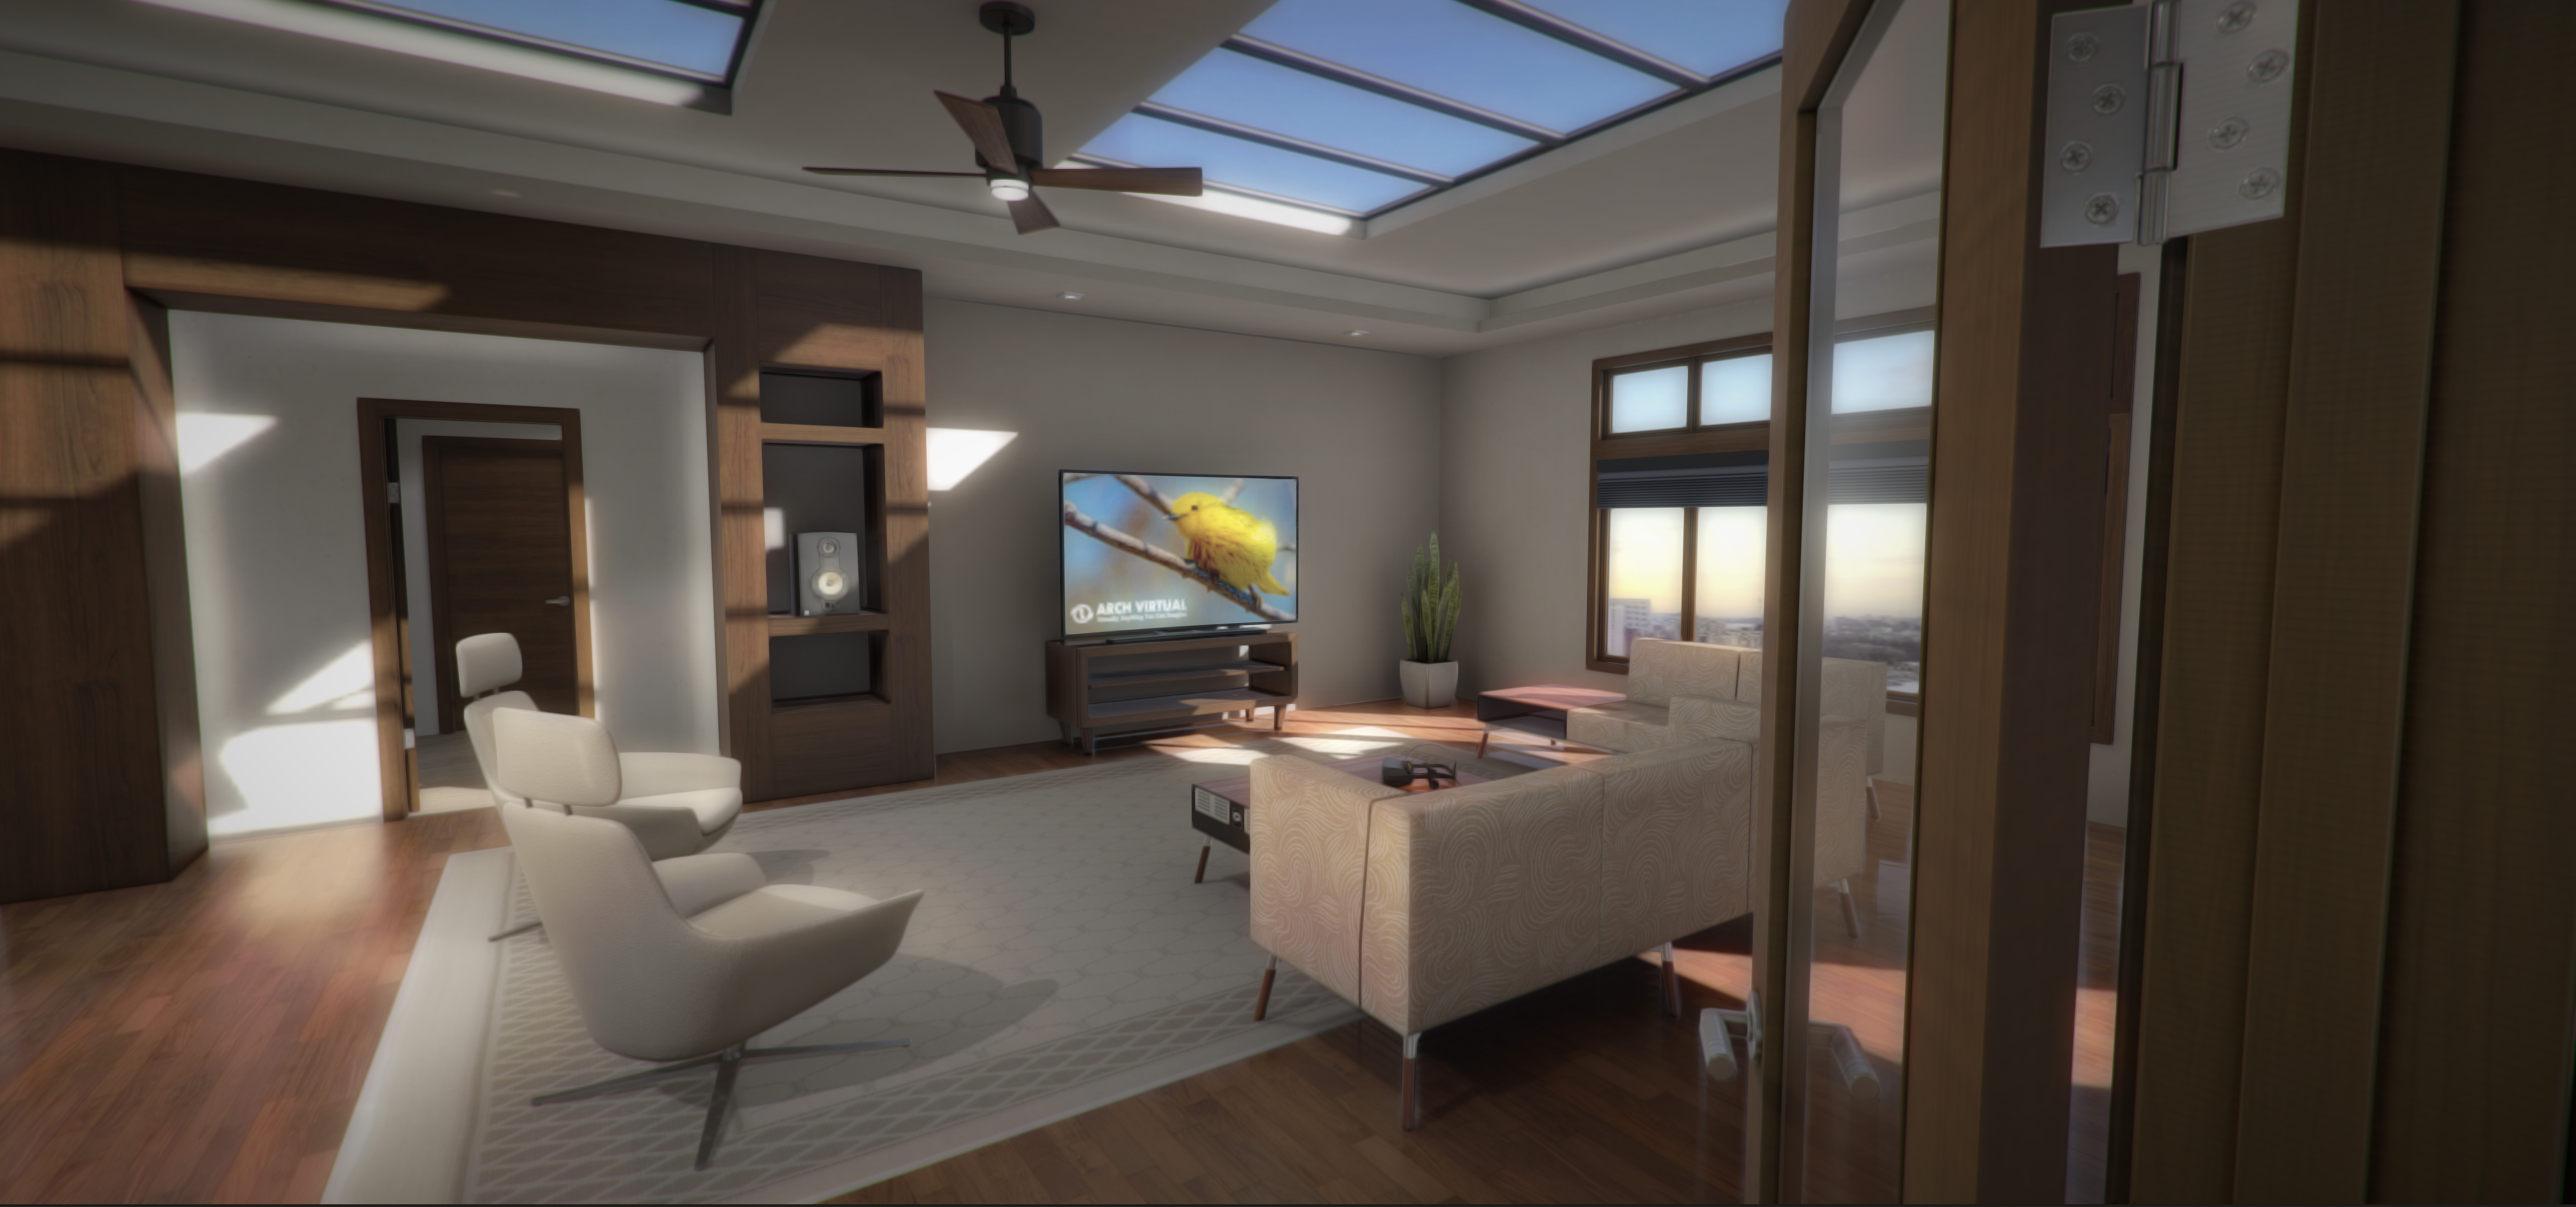 Architectural Visualization in Virtual Reality for Oculus